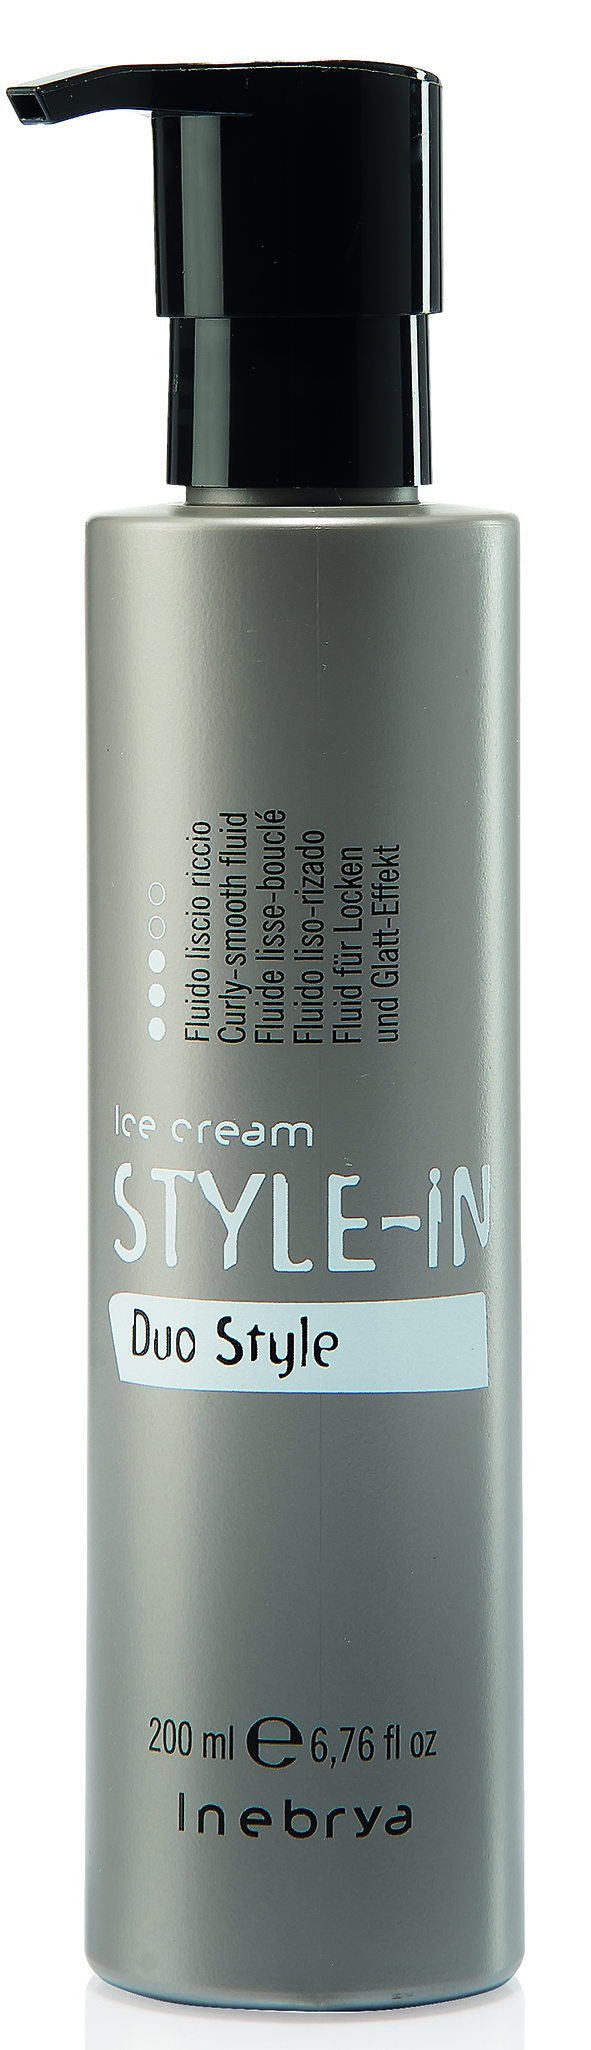 Style in Duo Style, 200ml